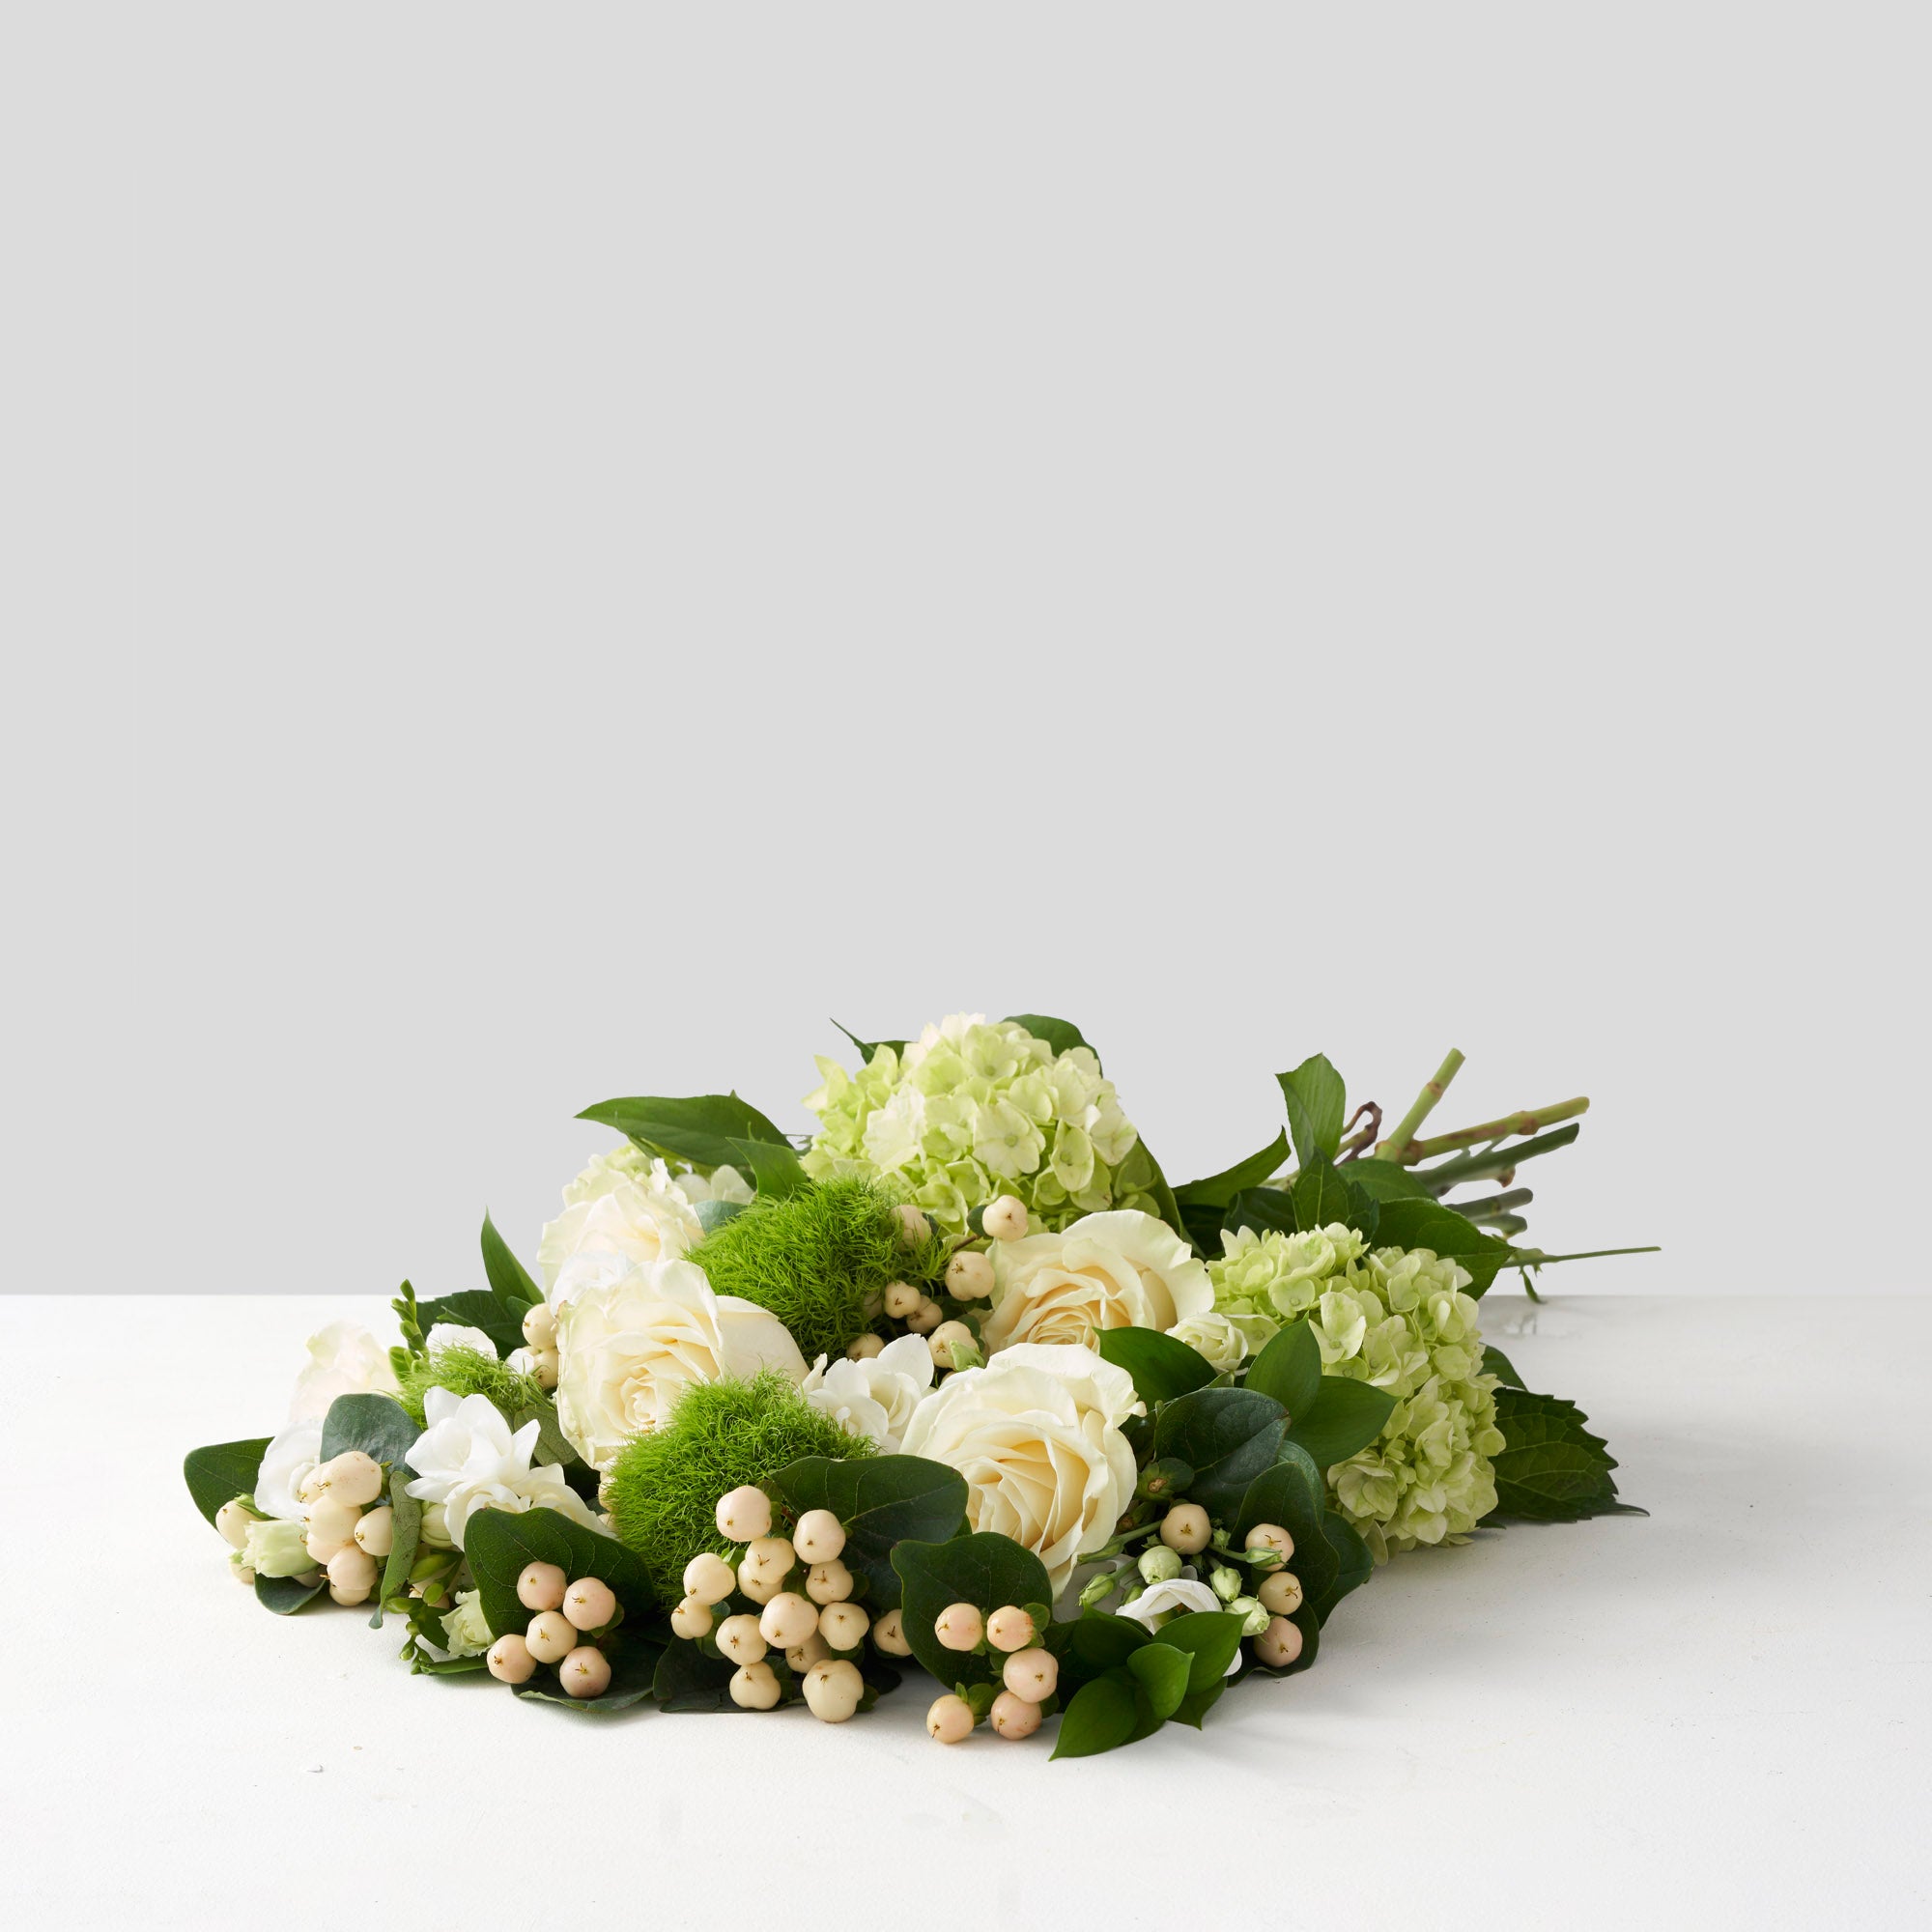 White Mondial roses with cream berries and green hydrangea on white background.